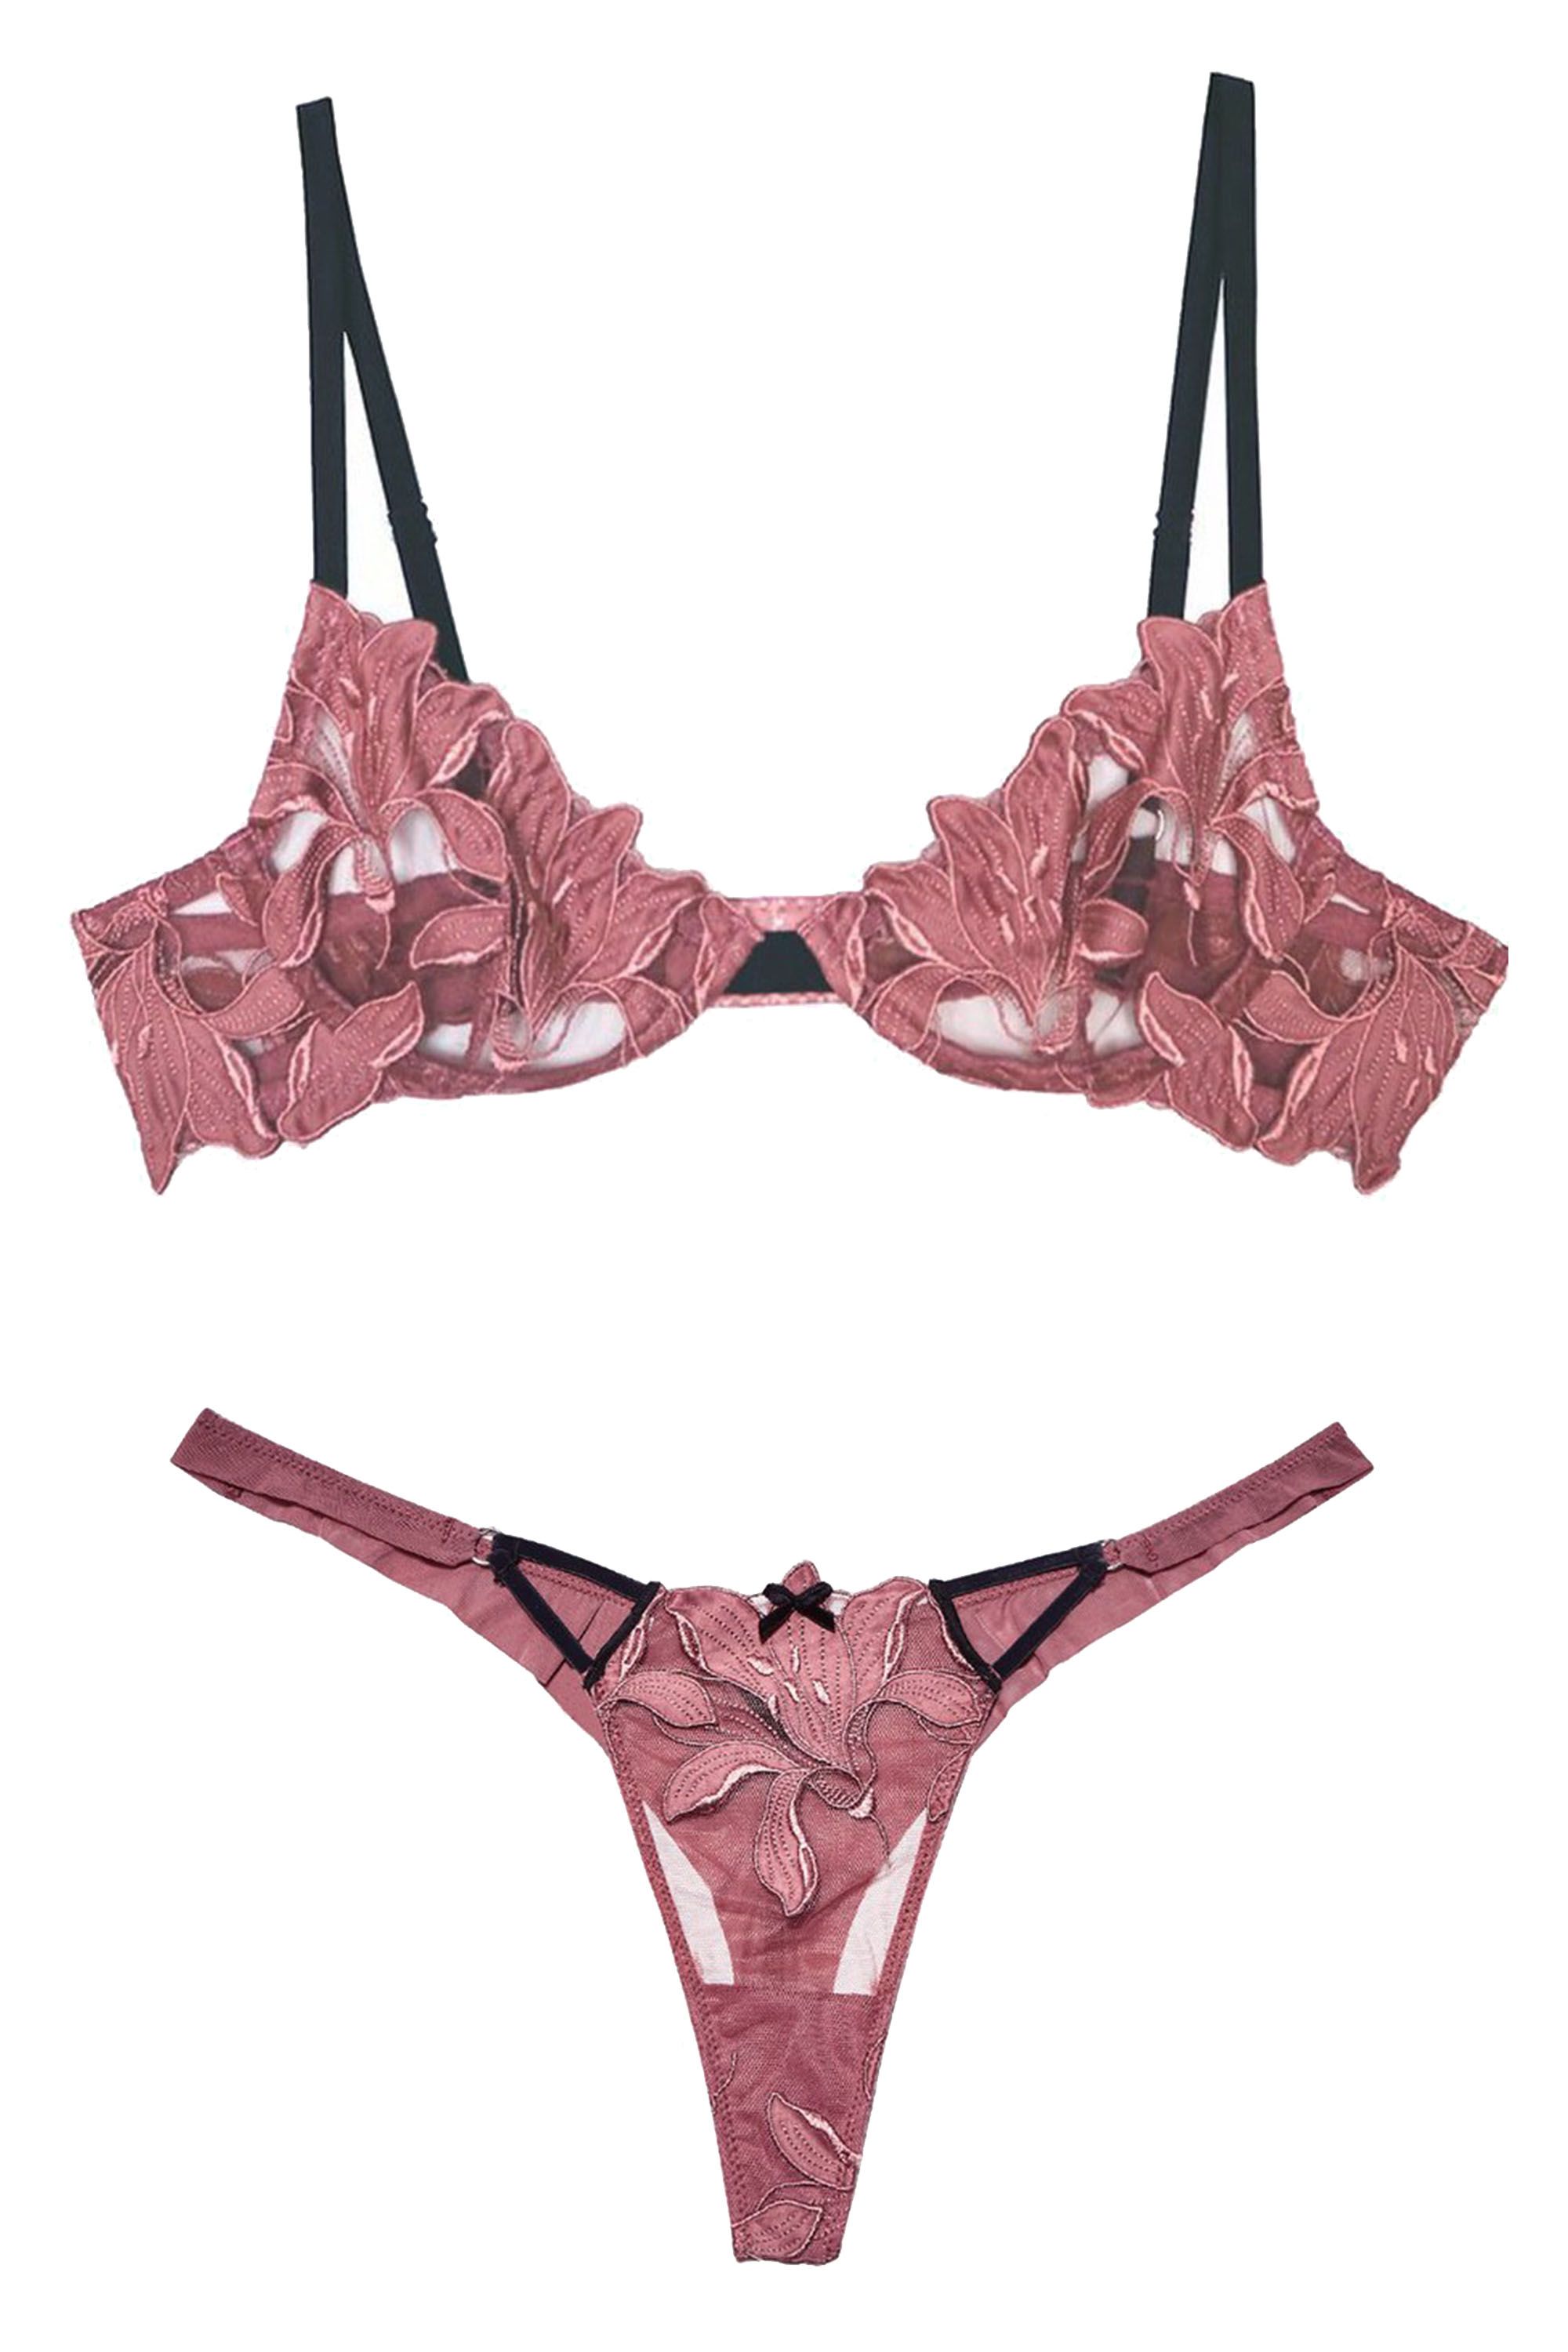 The Best Lingerie Brands In Canada If You Want To Spice Things Up On  Valentine's Day - Narcity